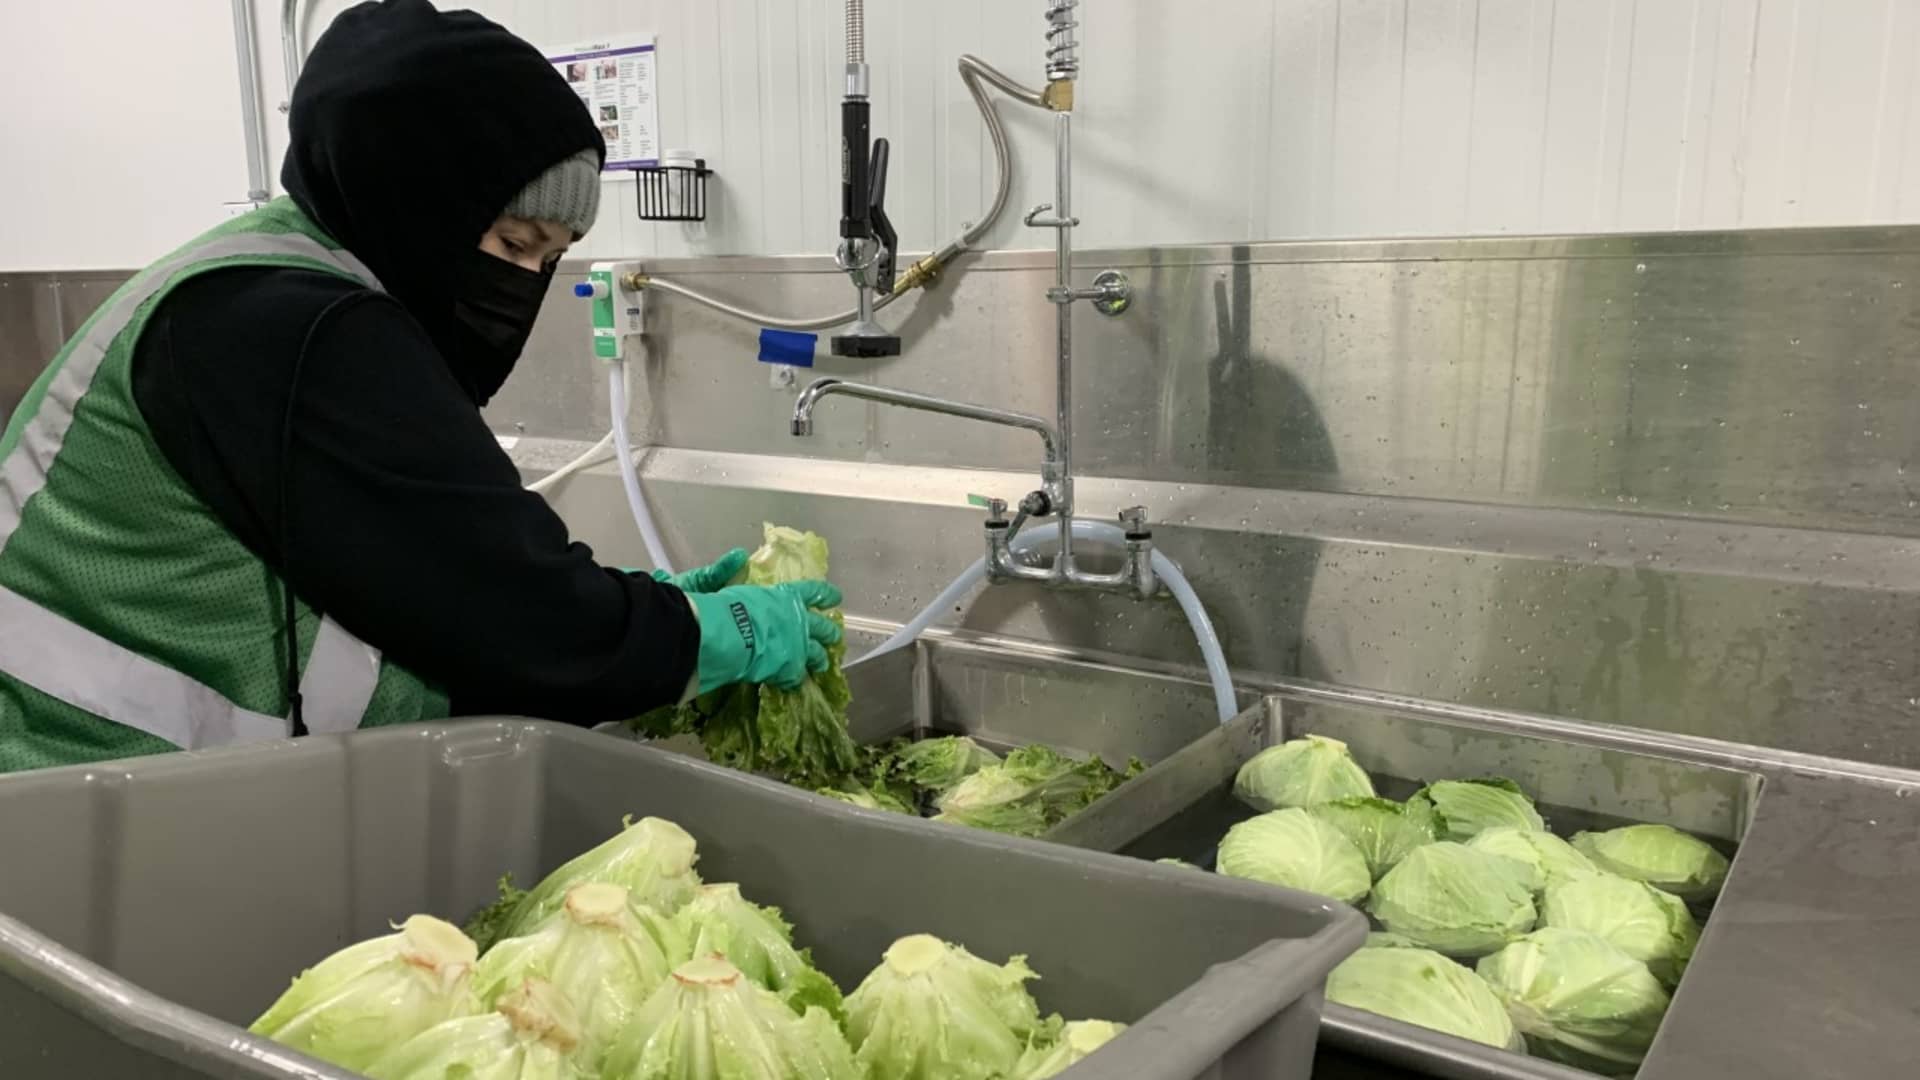 Employees soak lettuce and comb through clamshells of berries at Kroger's sheds to make sure they are fresh and high-quality.